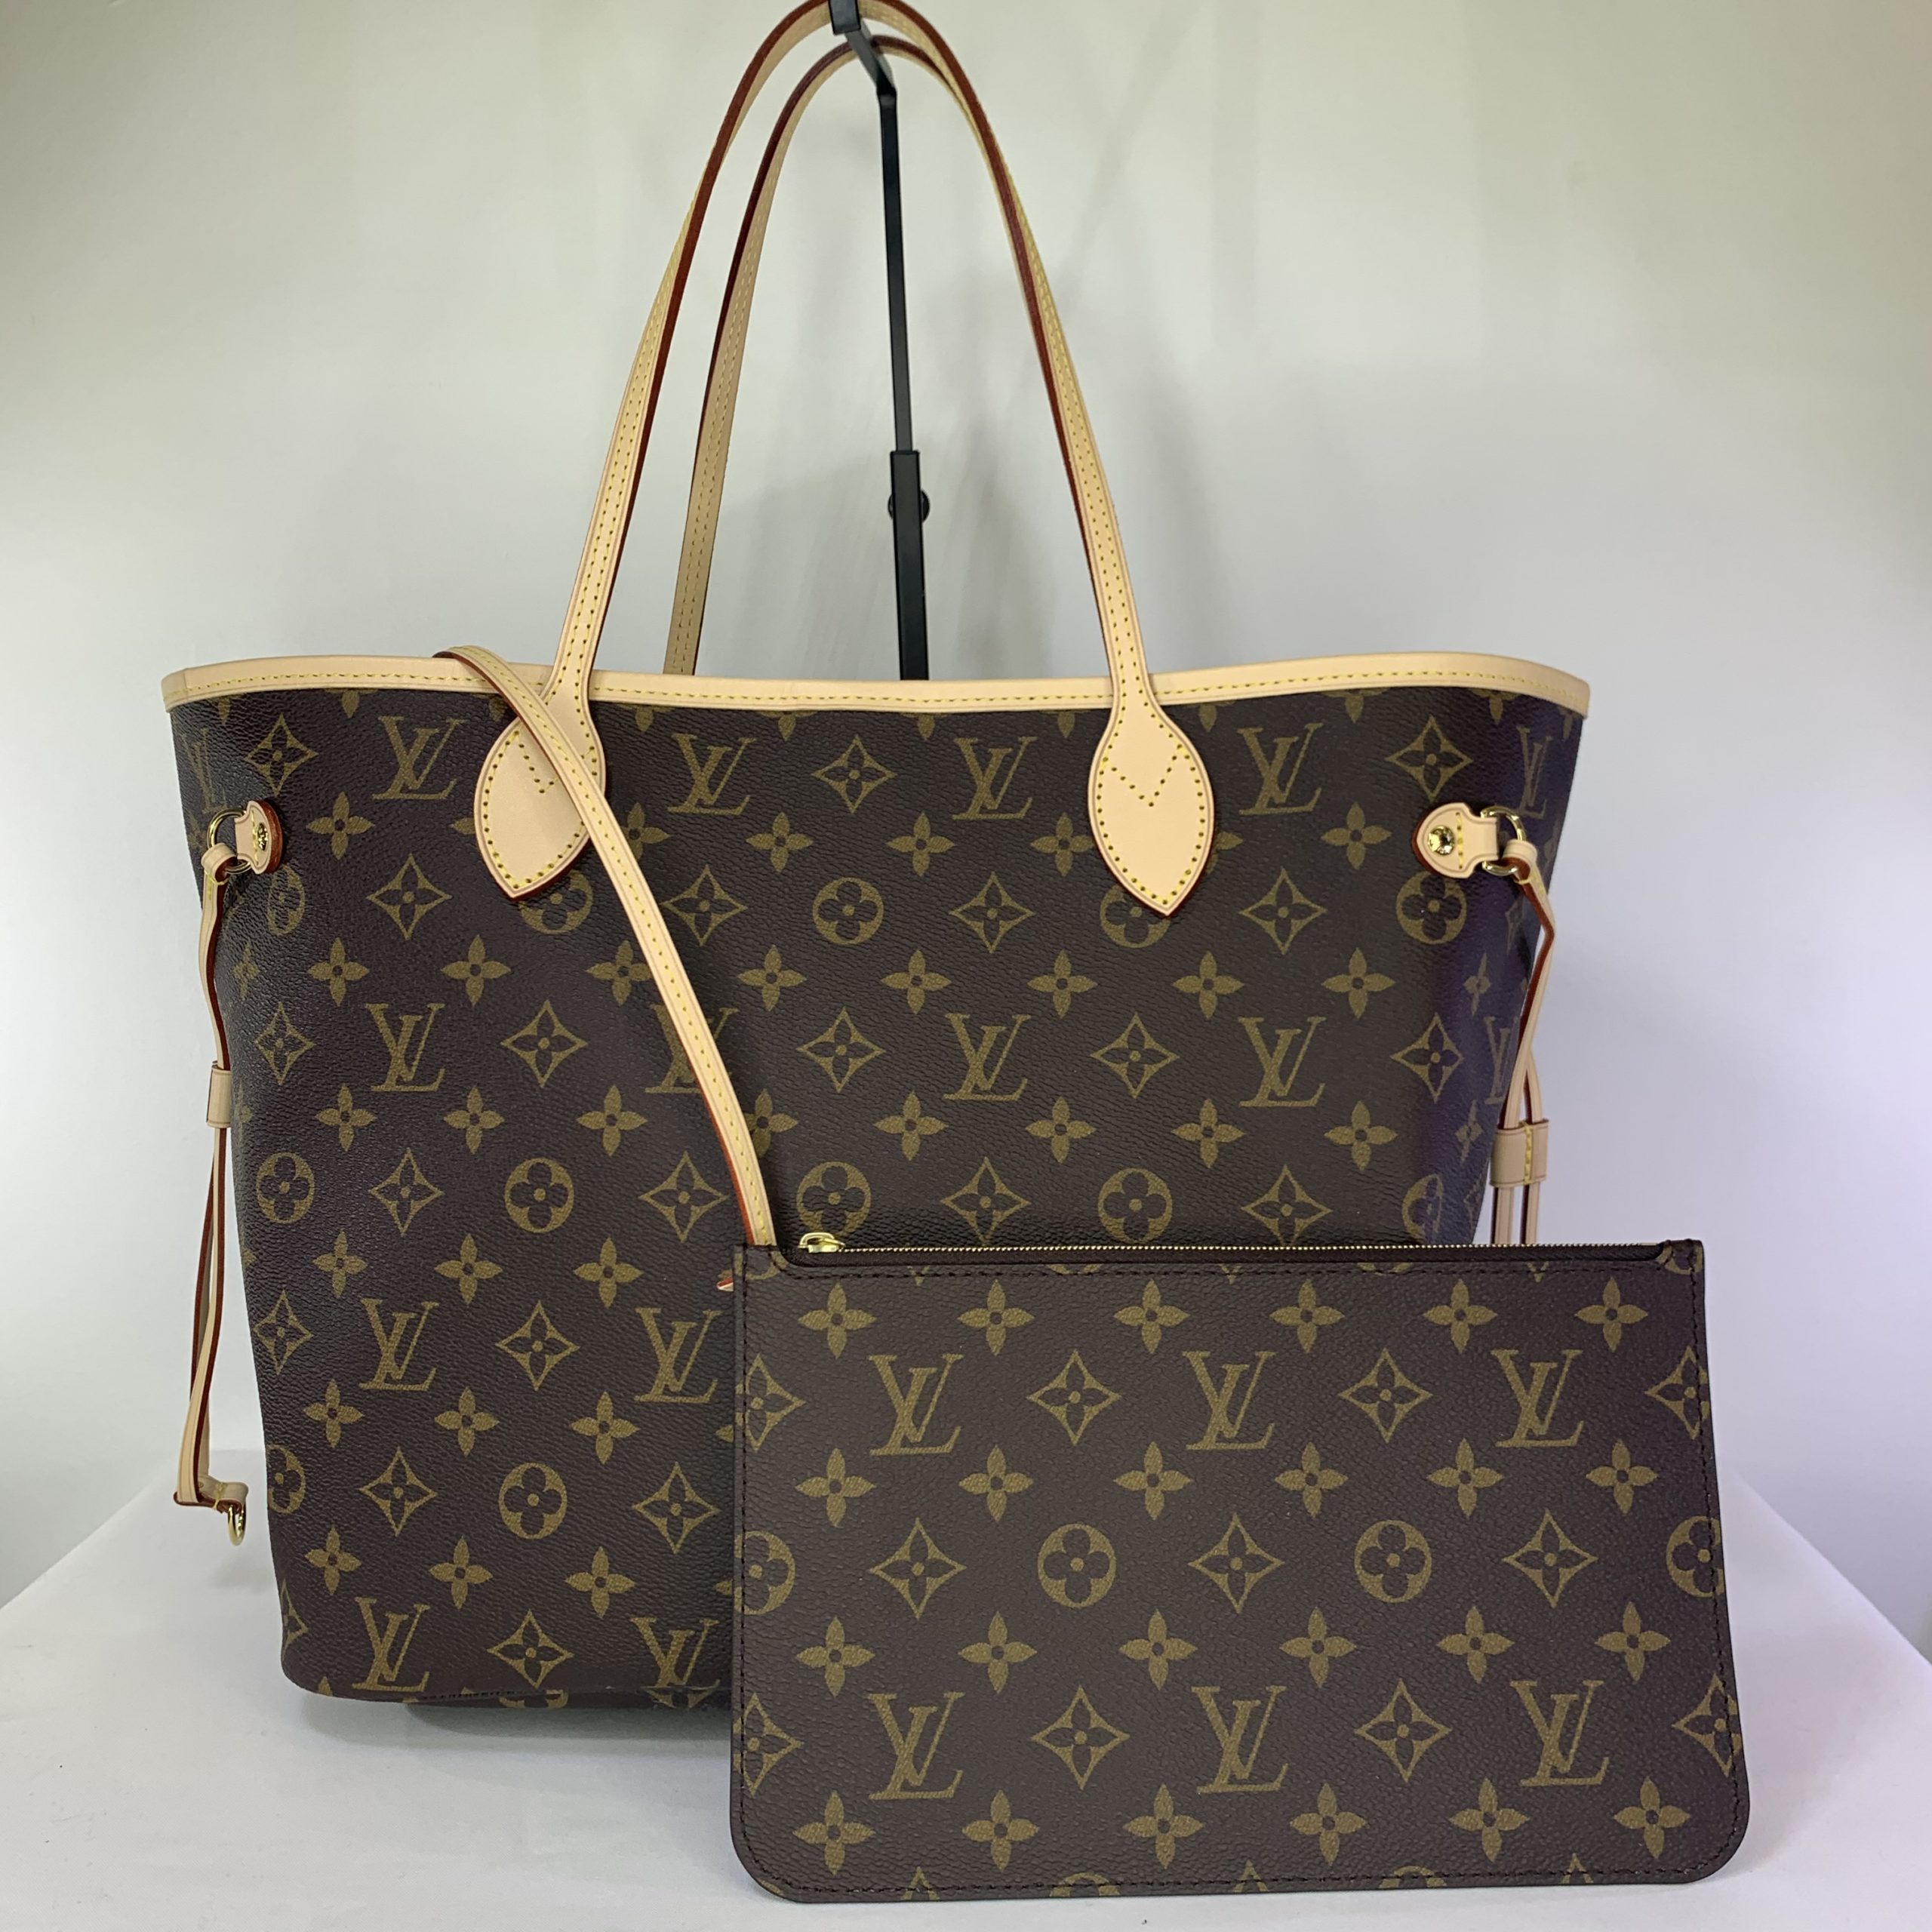 FAVORITE AND MOST USED LOUIS VUITTON BAGS OF 2020